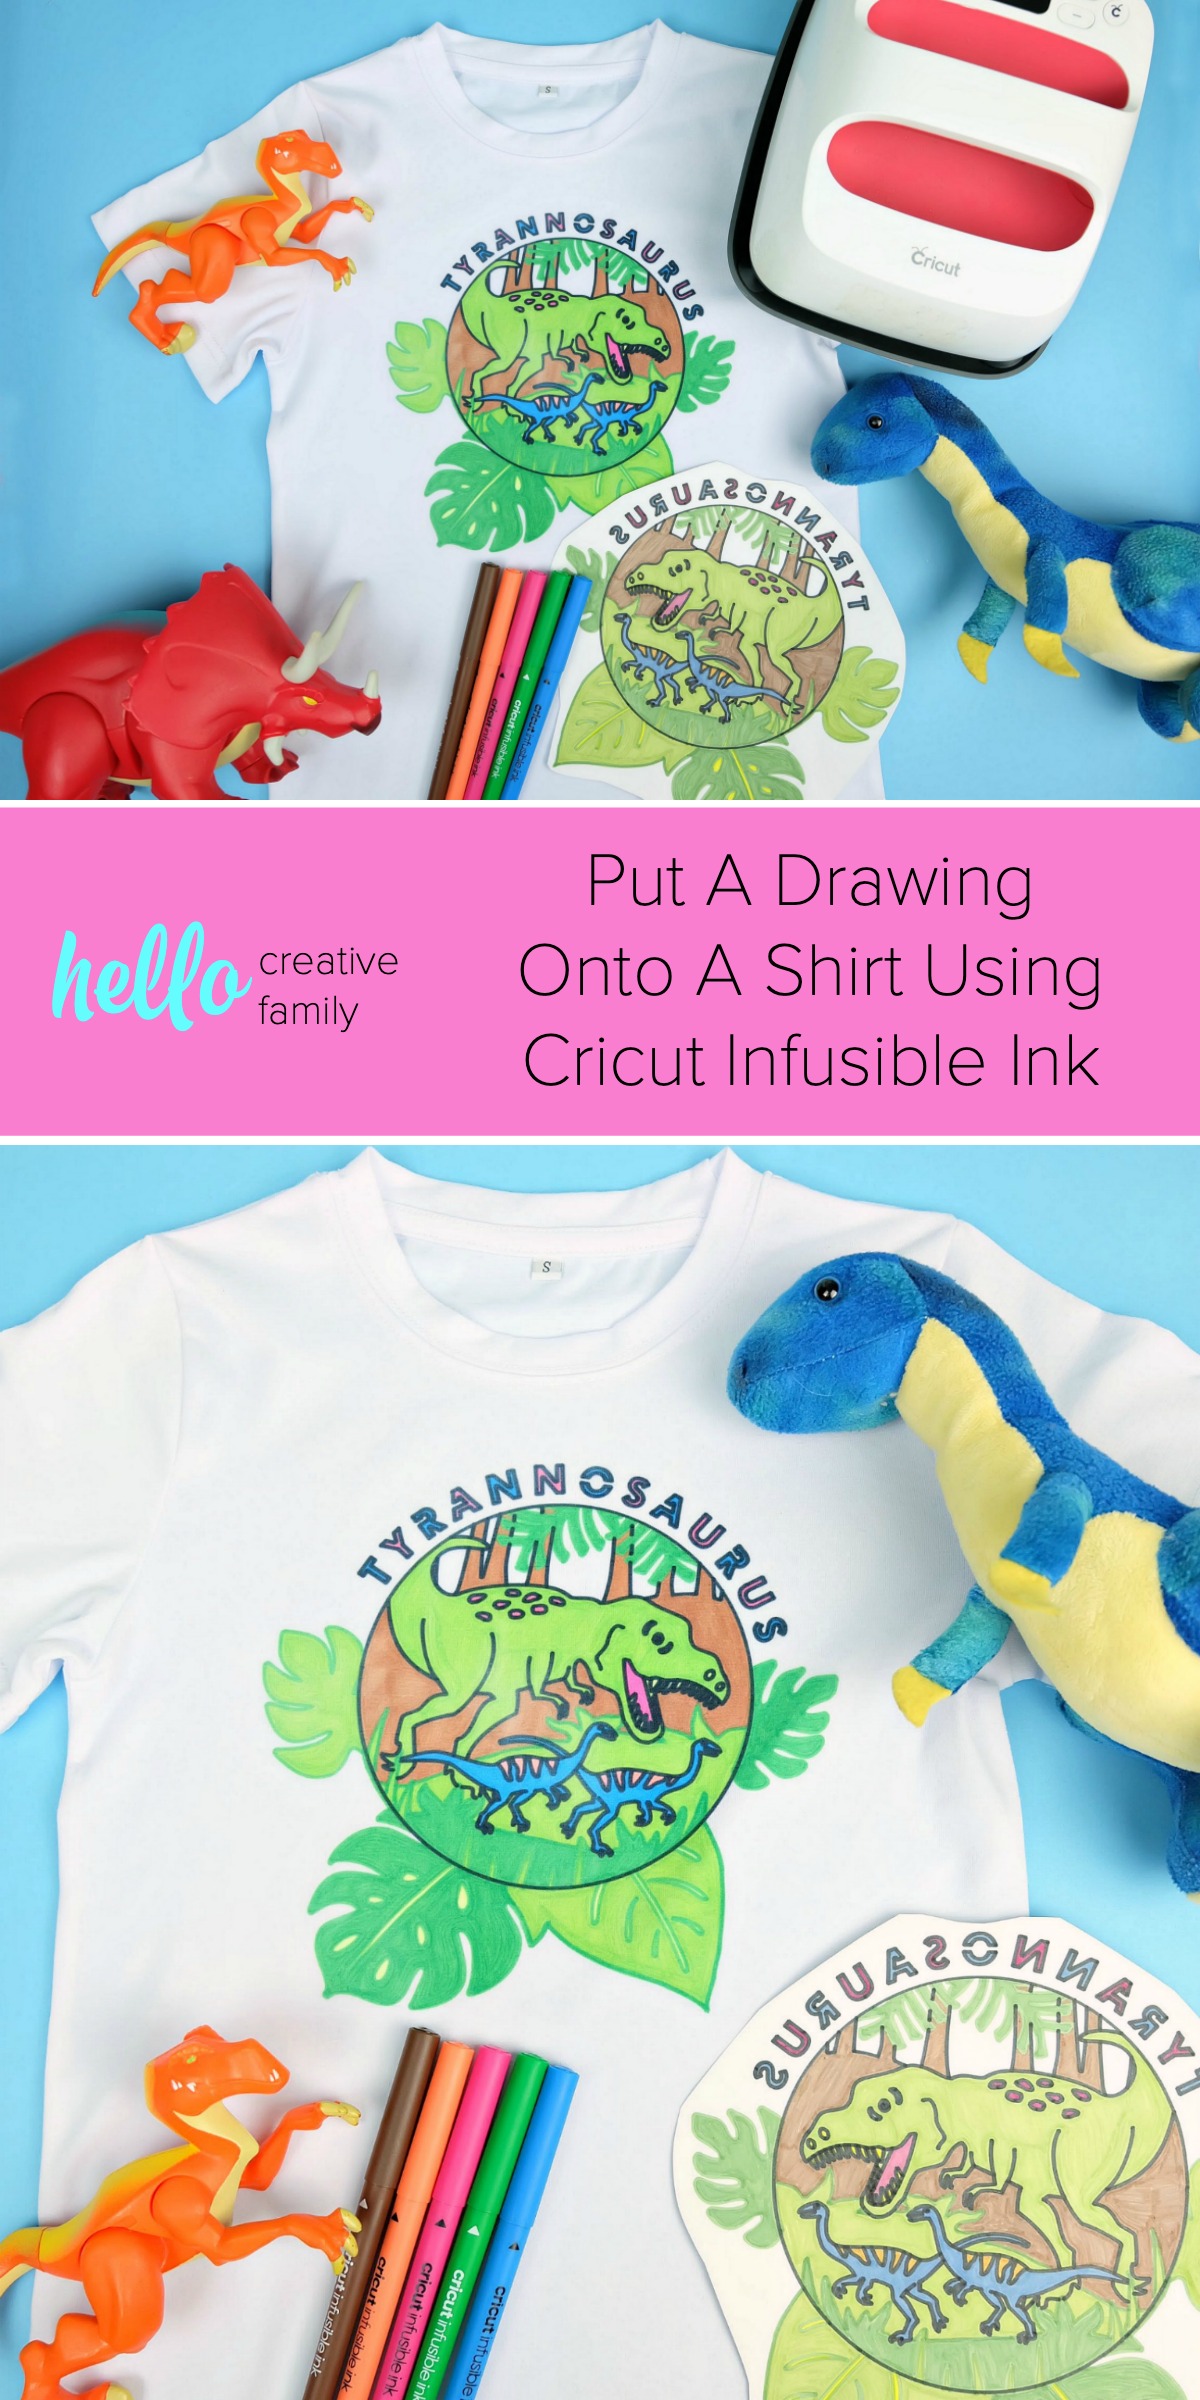 Learn how to put your drawing onto a shirt using Cricut Infusible Ink to make the most adorable dinosaur shirt! The perfect way to turn a child's drawing into something they can wear! Perfect for a dinosaur birthday #Cricut #InfusibleInk #Dinosaur #DinosaurBirthday